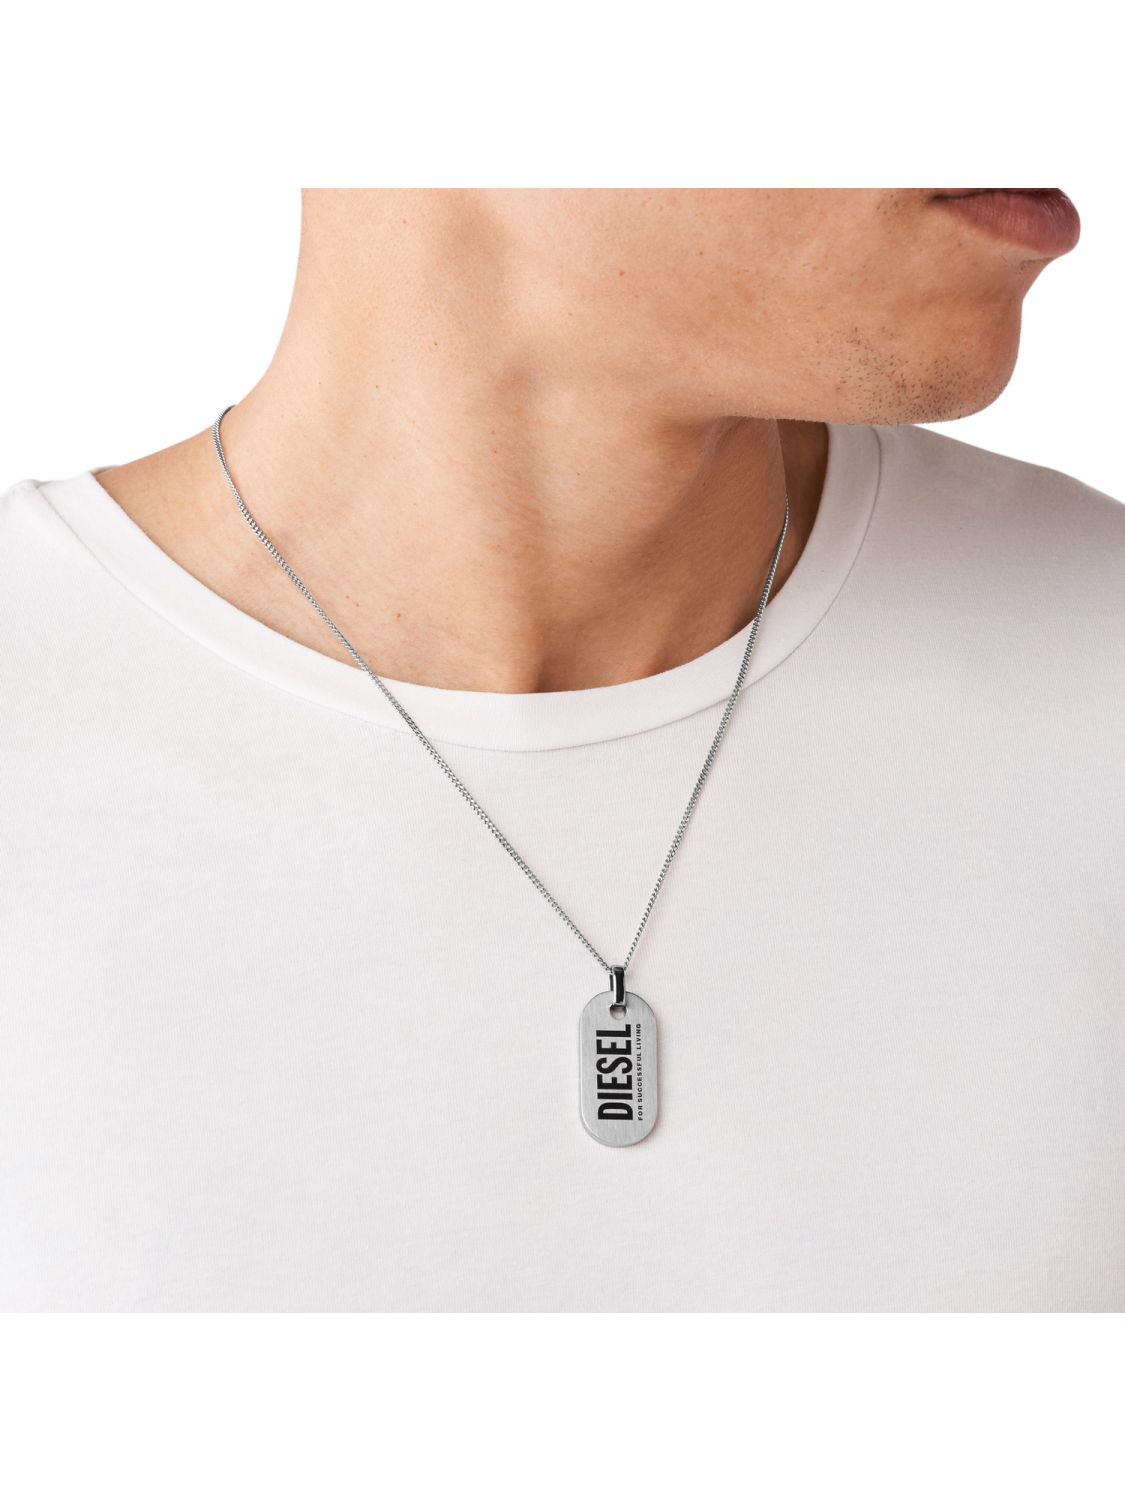 Diesel Men\'s Curb Chain Necklace Dog Pendant with • DX1348040 uhrcenter Tag